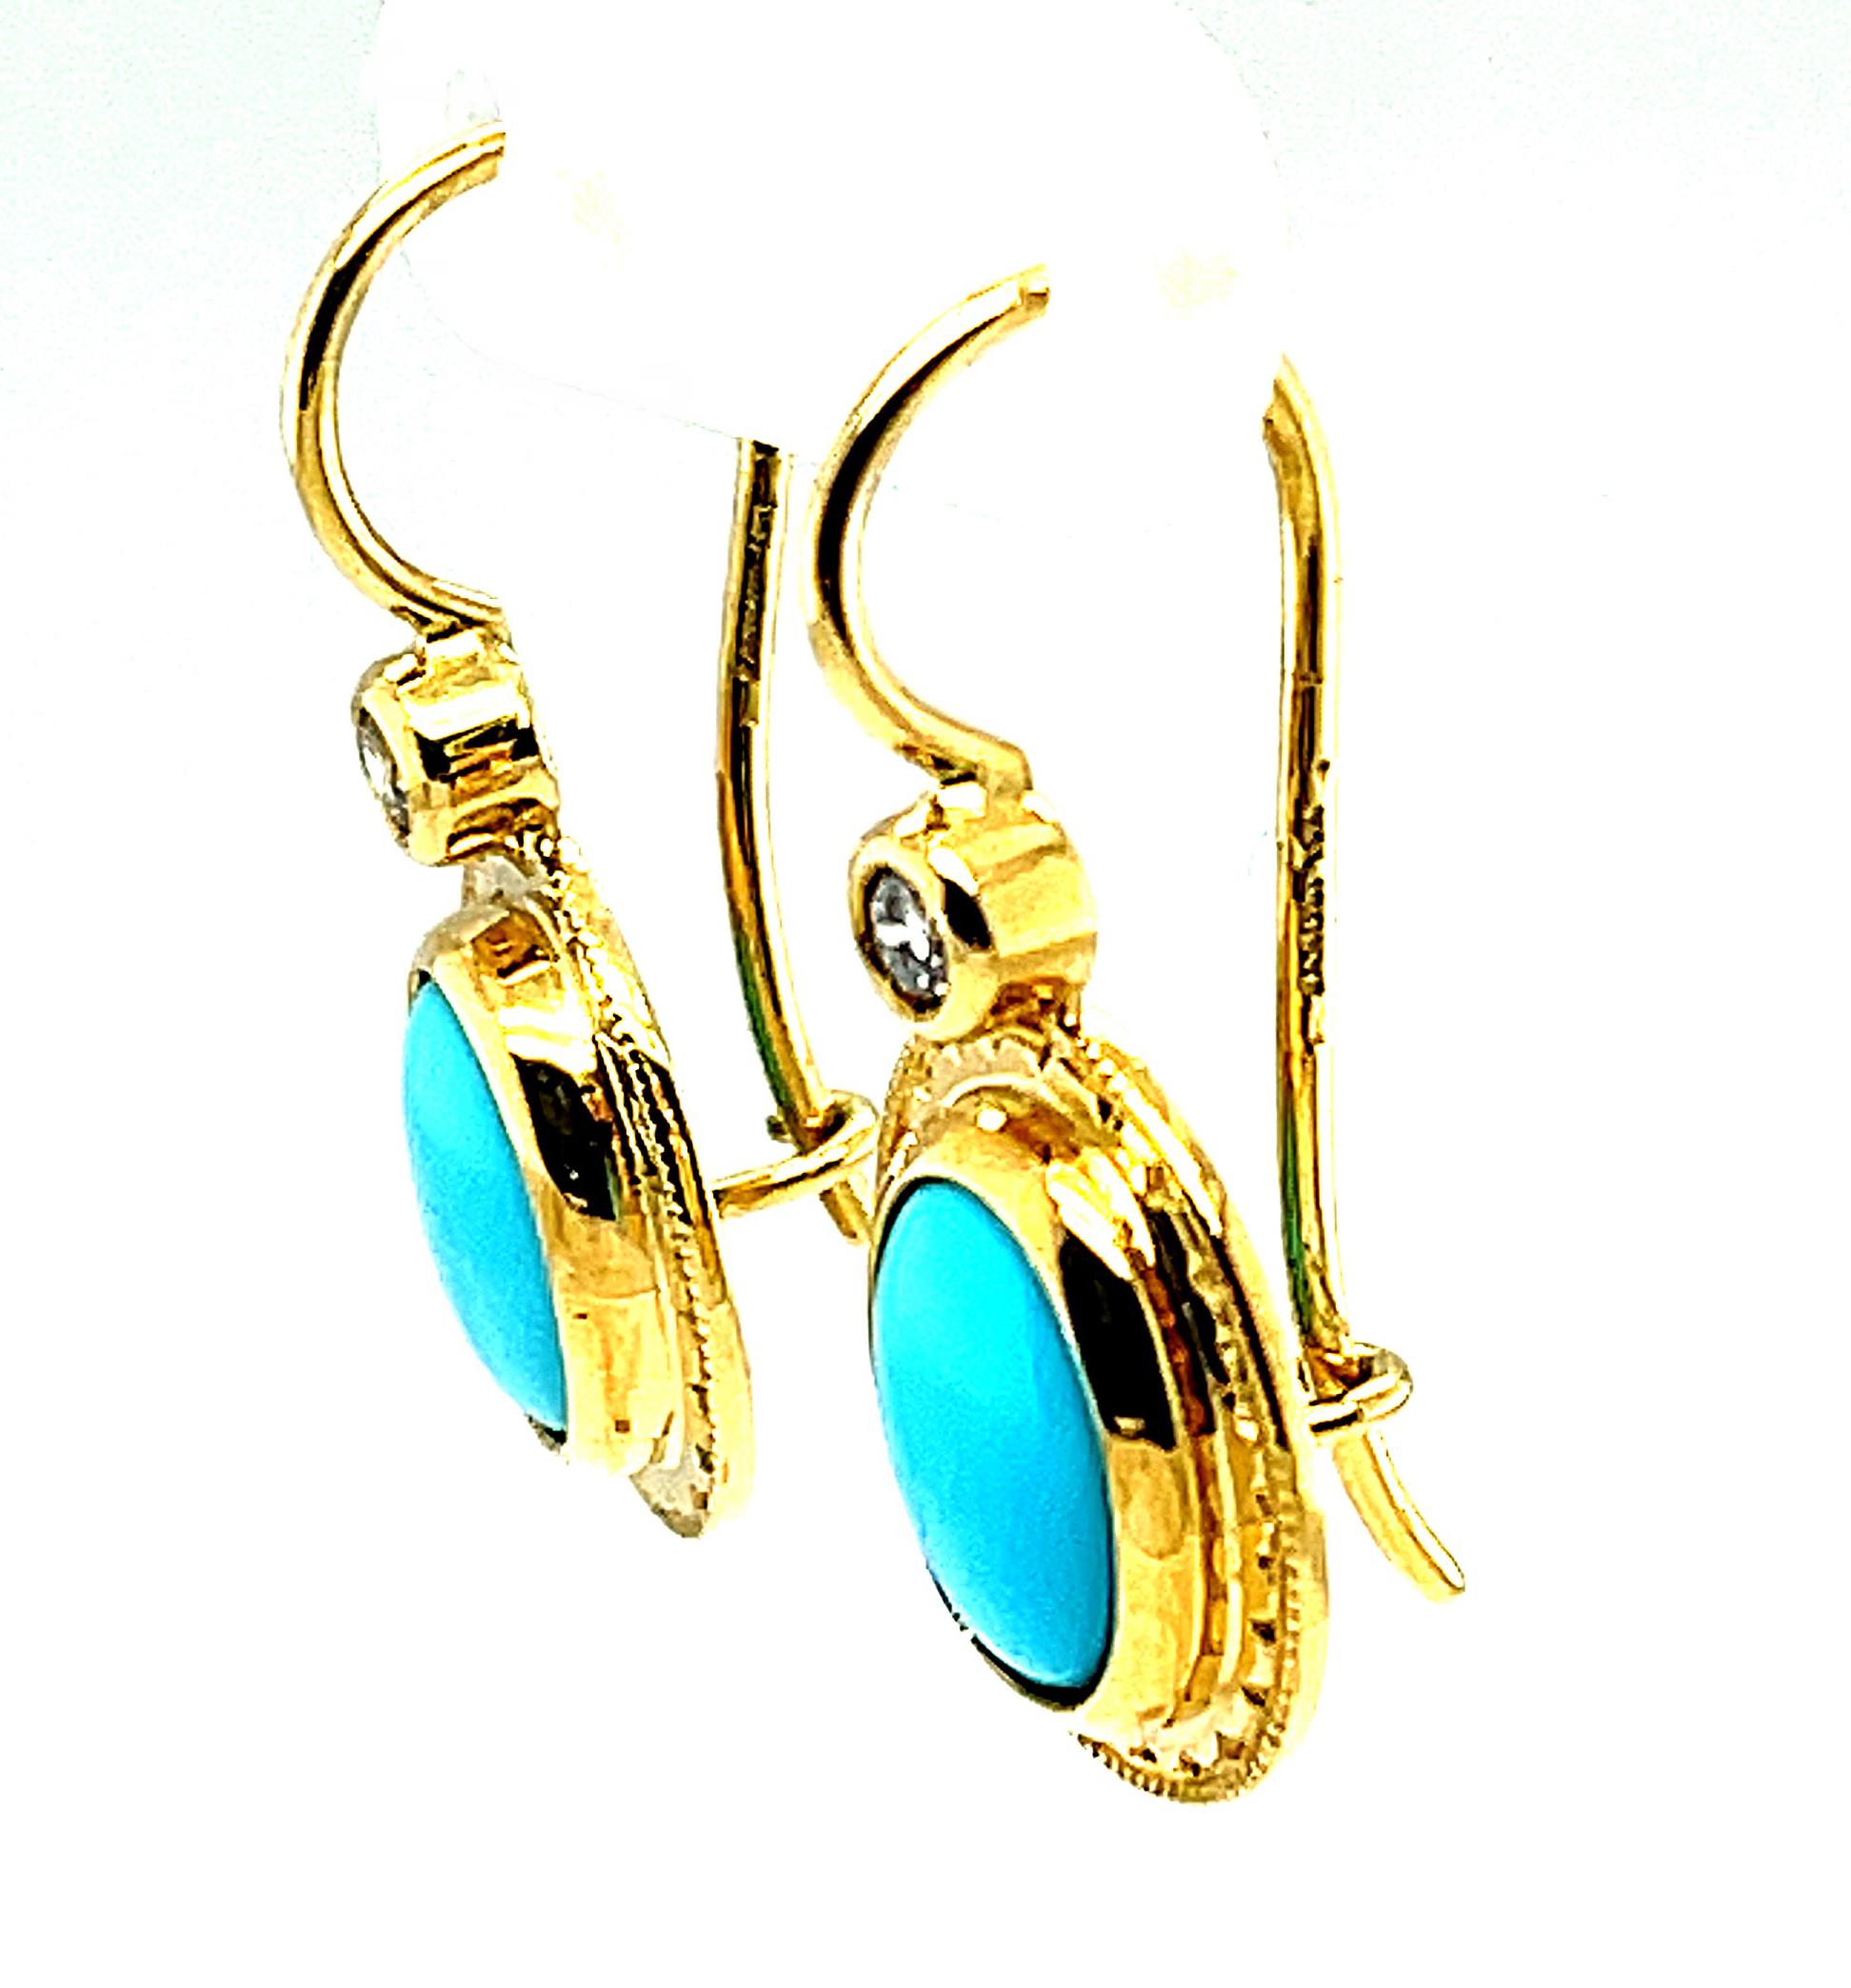 Cabochon Sleeping Beauty Turquoise and Diamond Drop Earrings in Yellow Gold